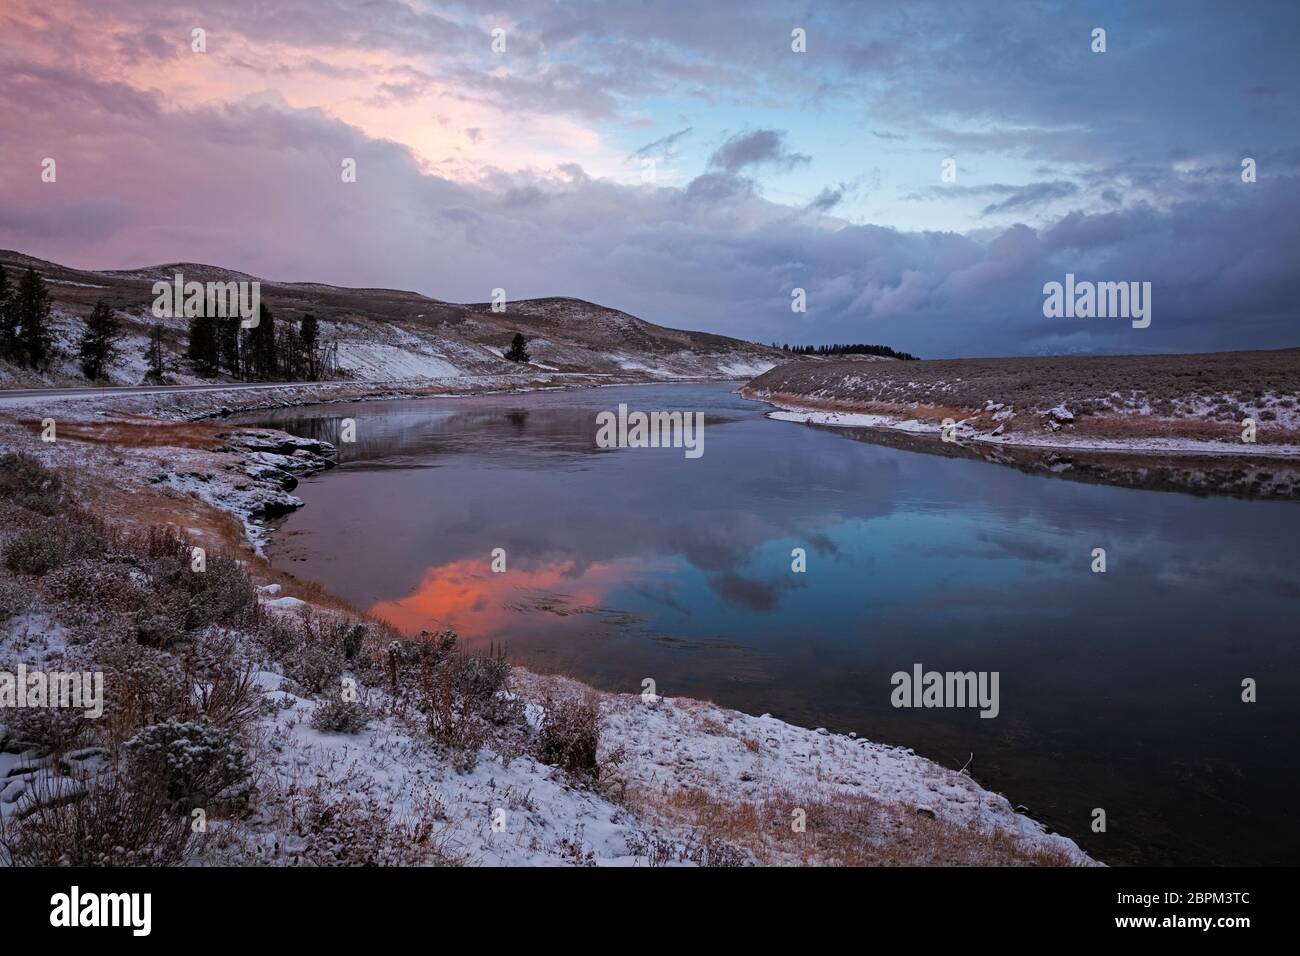 WY04391-00...WYOMING - Sunrise colors reflecting in the Yellowstone River in the Hayden Valley area of Yellowstone National Park. Stock Photo